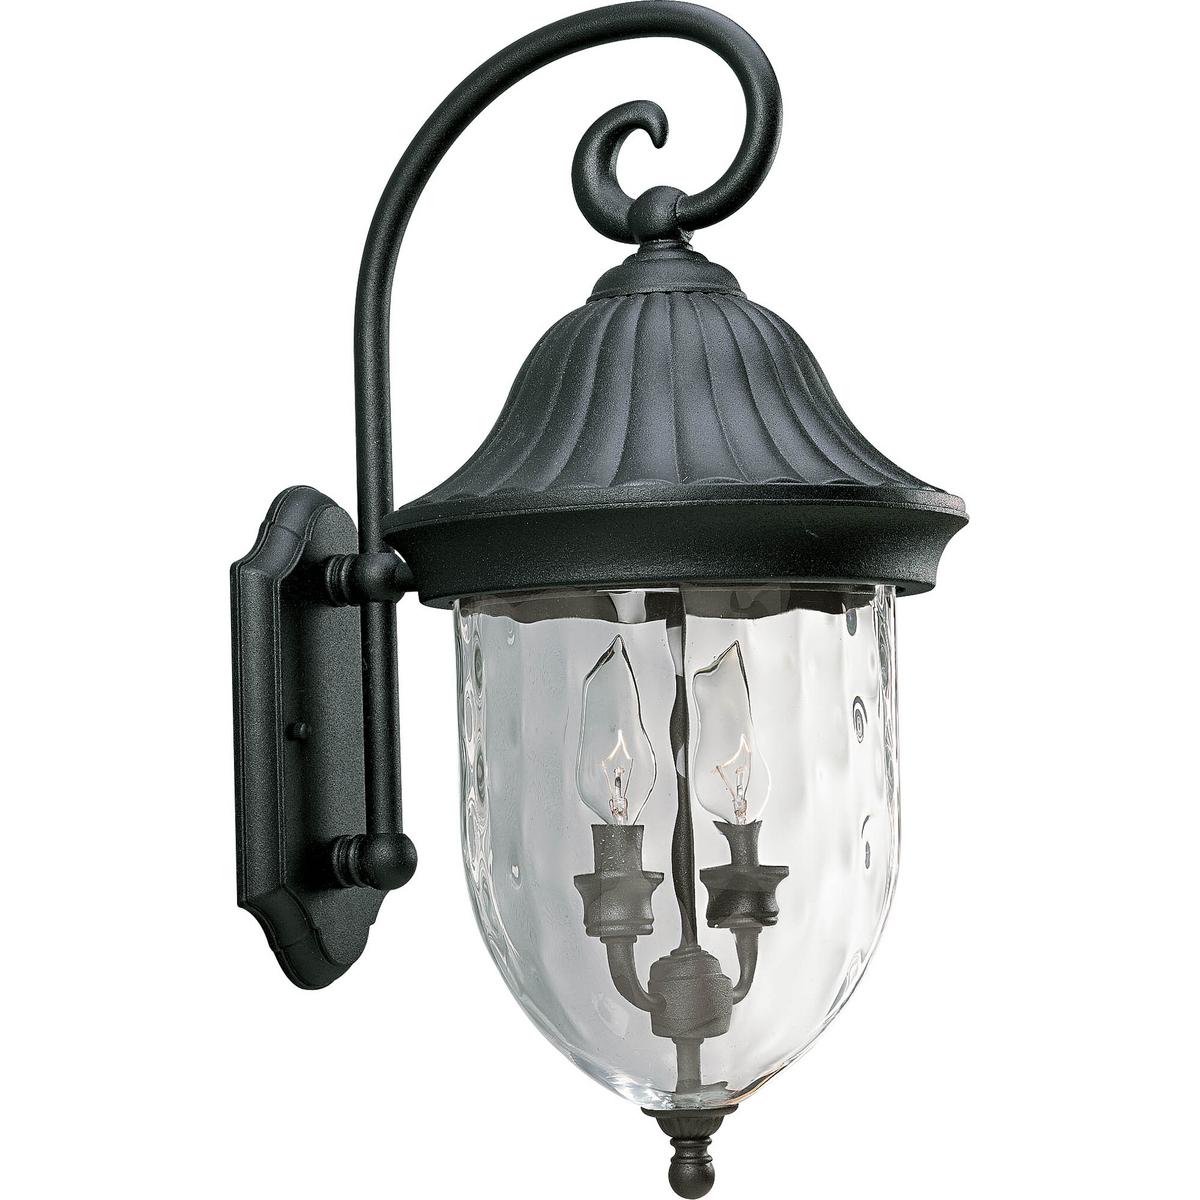 Hubbell P5829-31 Capture the romance with this two-light wall lantern from the Coventry collection that features optic hammered glass, stylized cap and Sheppard's hook. Die-cast aluminum construction. Textured Black finish.  ; Textured Black finish. ; Optic hammered glass